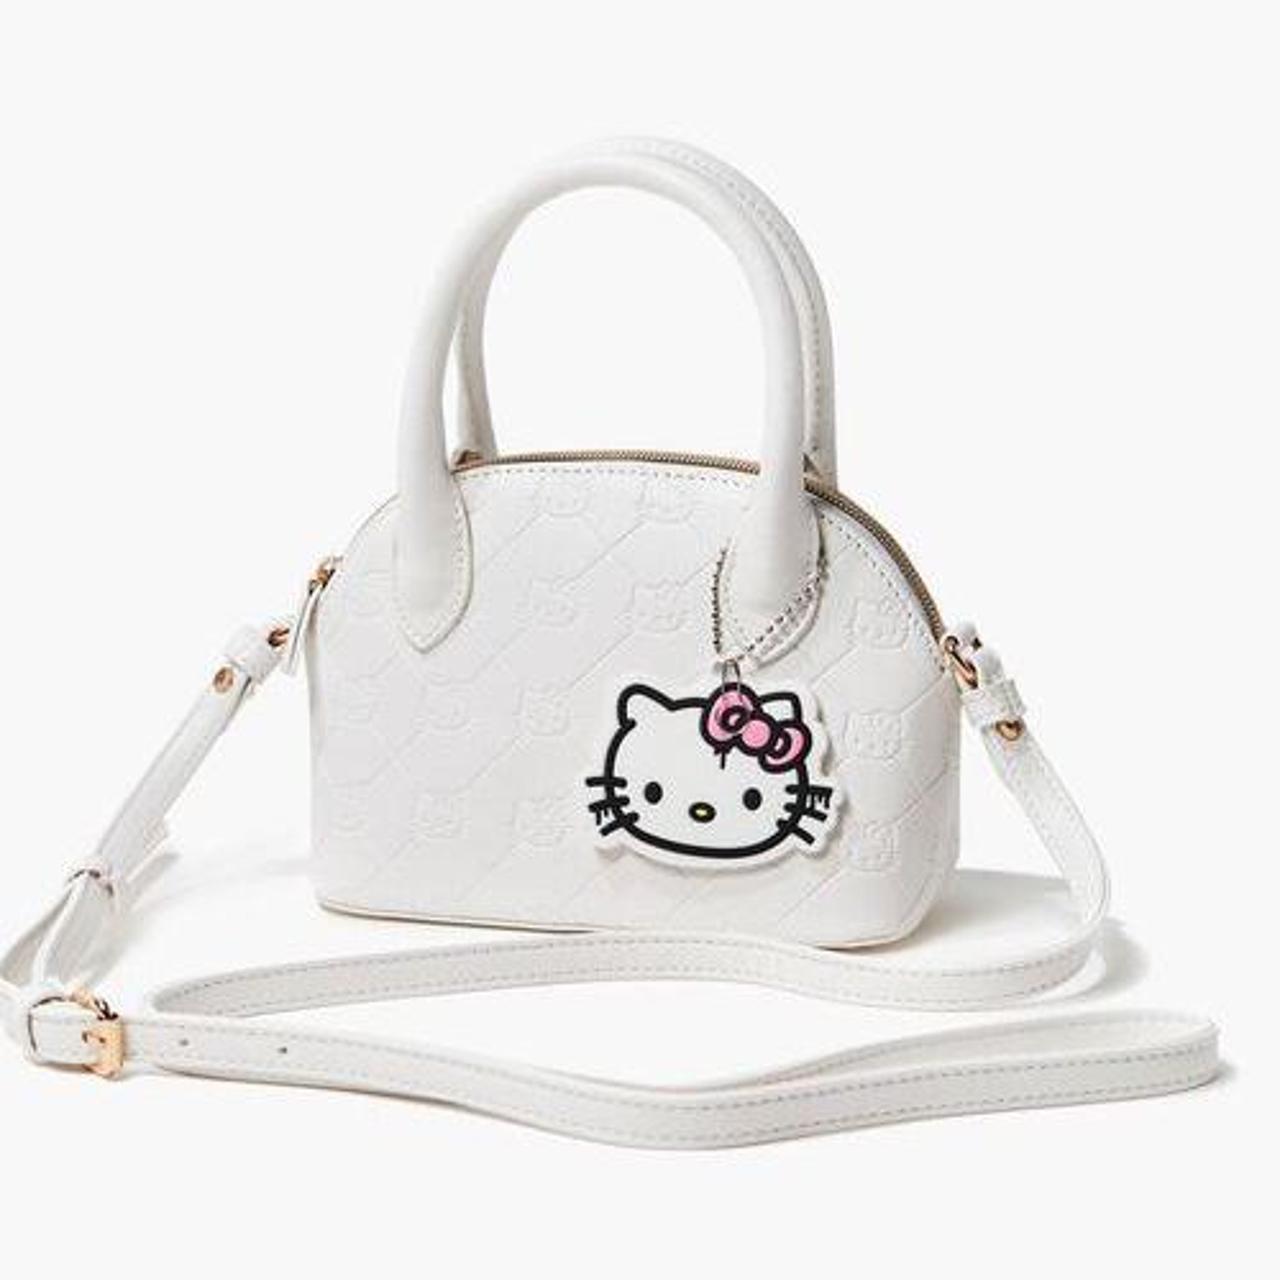 Small White Crossbody Bags : Target